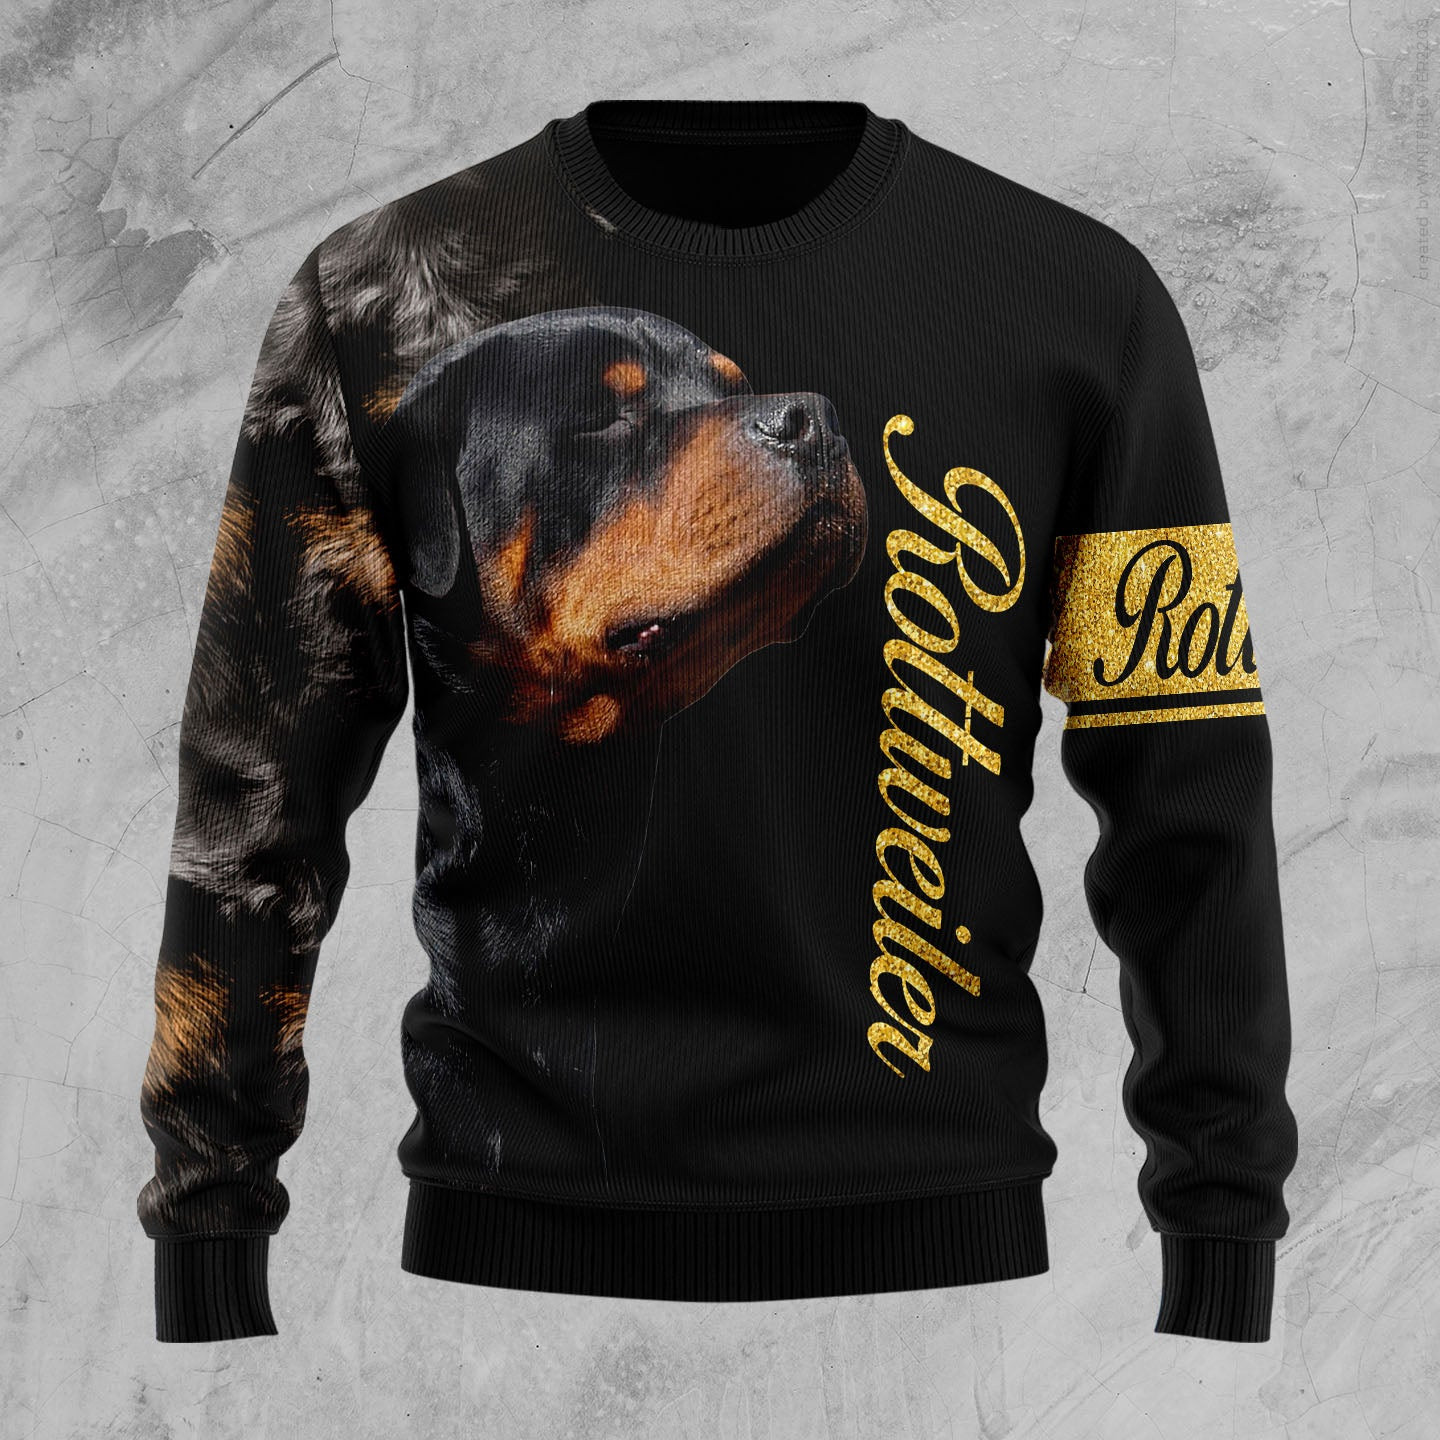 Rottweiler Half Cool Ugly Christmas Sweater, Ugly Sweater For Men Women, Holiday Sweater